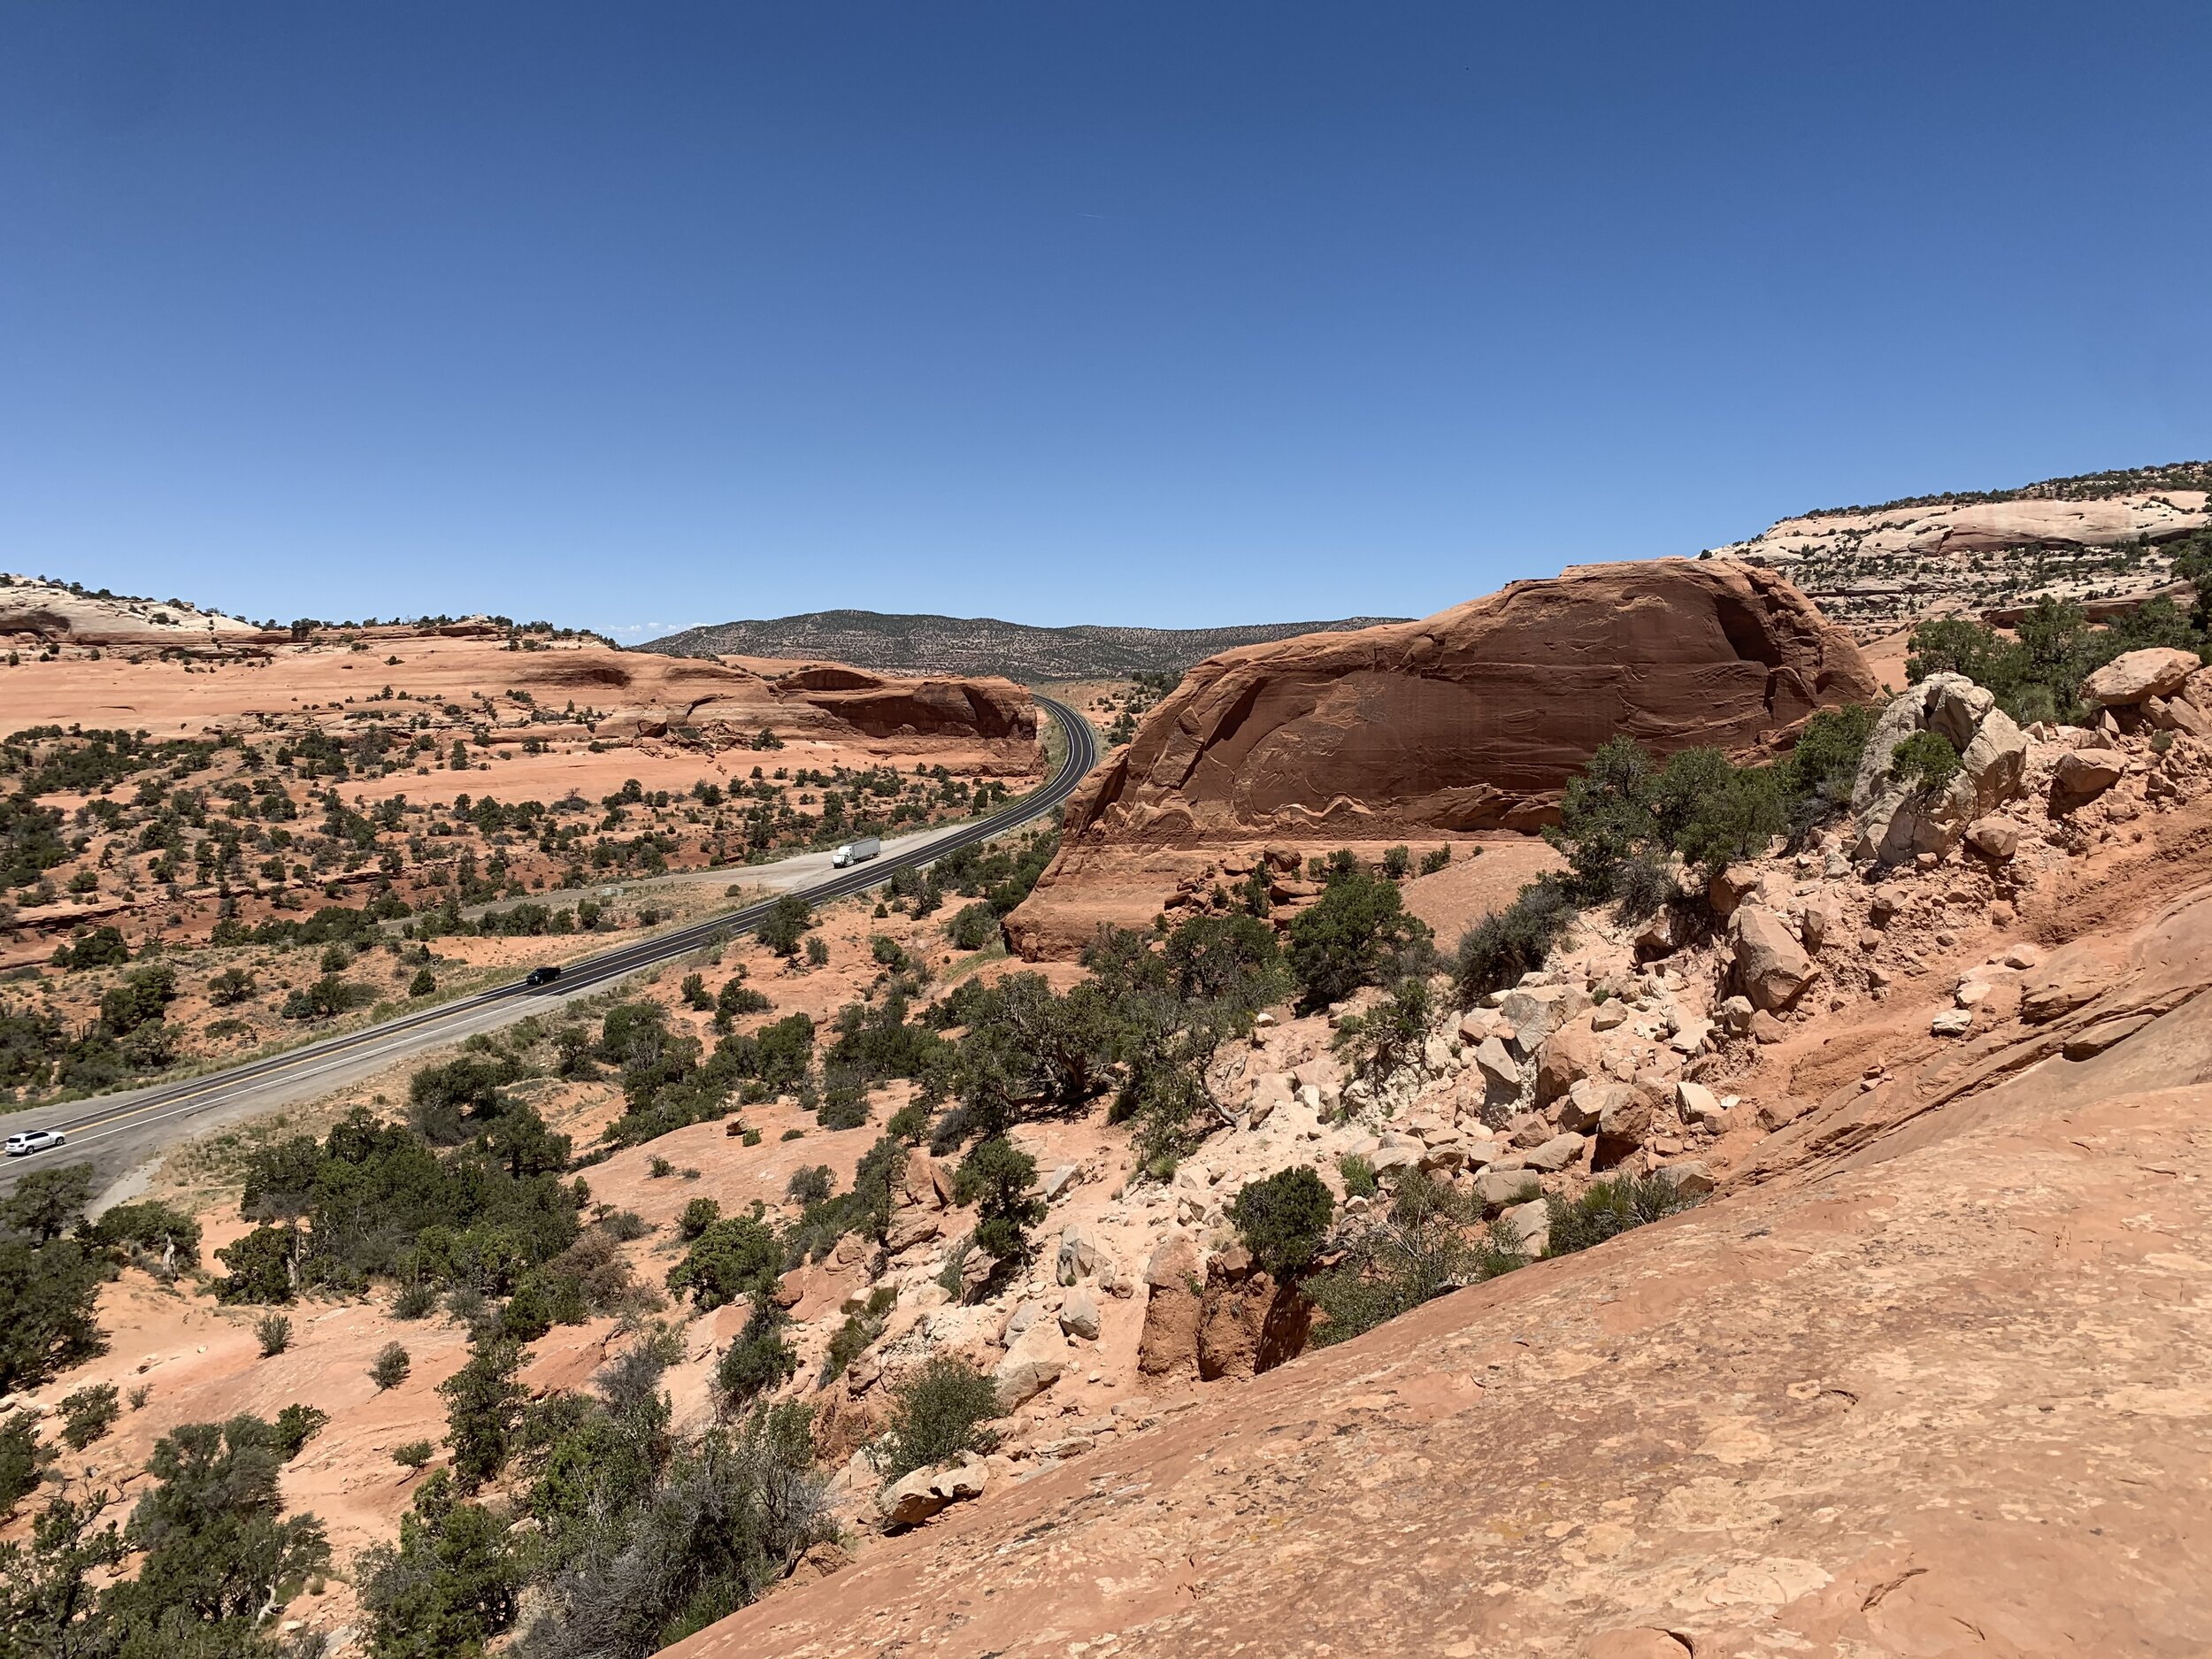  The desert road at the La Sal arch.  